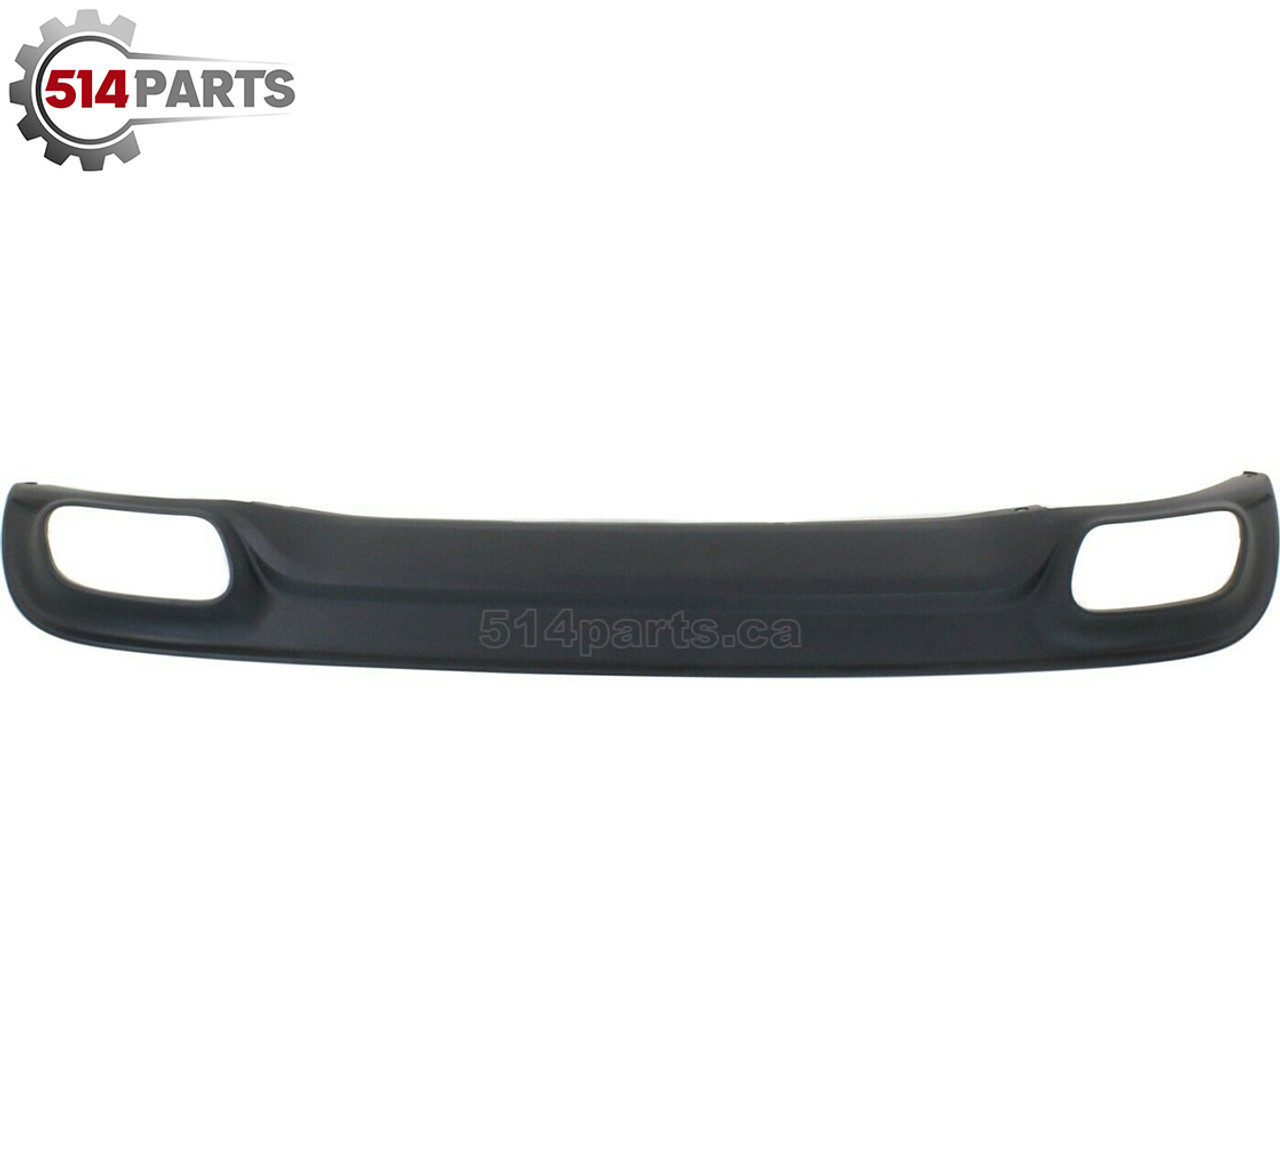 2015 - 2021 DODGE CHARGER SE/SXT/RT AND RT ROAD AND TRACK MODELS TEXTURED REAR LOWER BUMPER VALANCE PANEL(DIFFUSER) - VALANCE(DIFFUSEUR) du PARE-CHOCS ARRIERE INFERIEUR TEXTURE